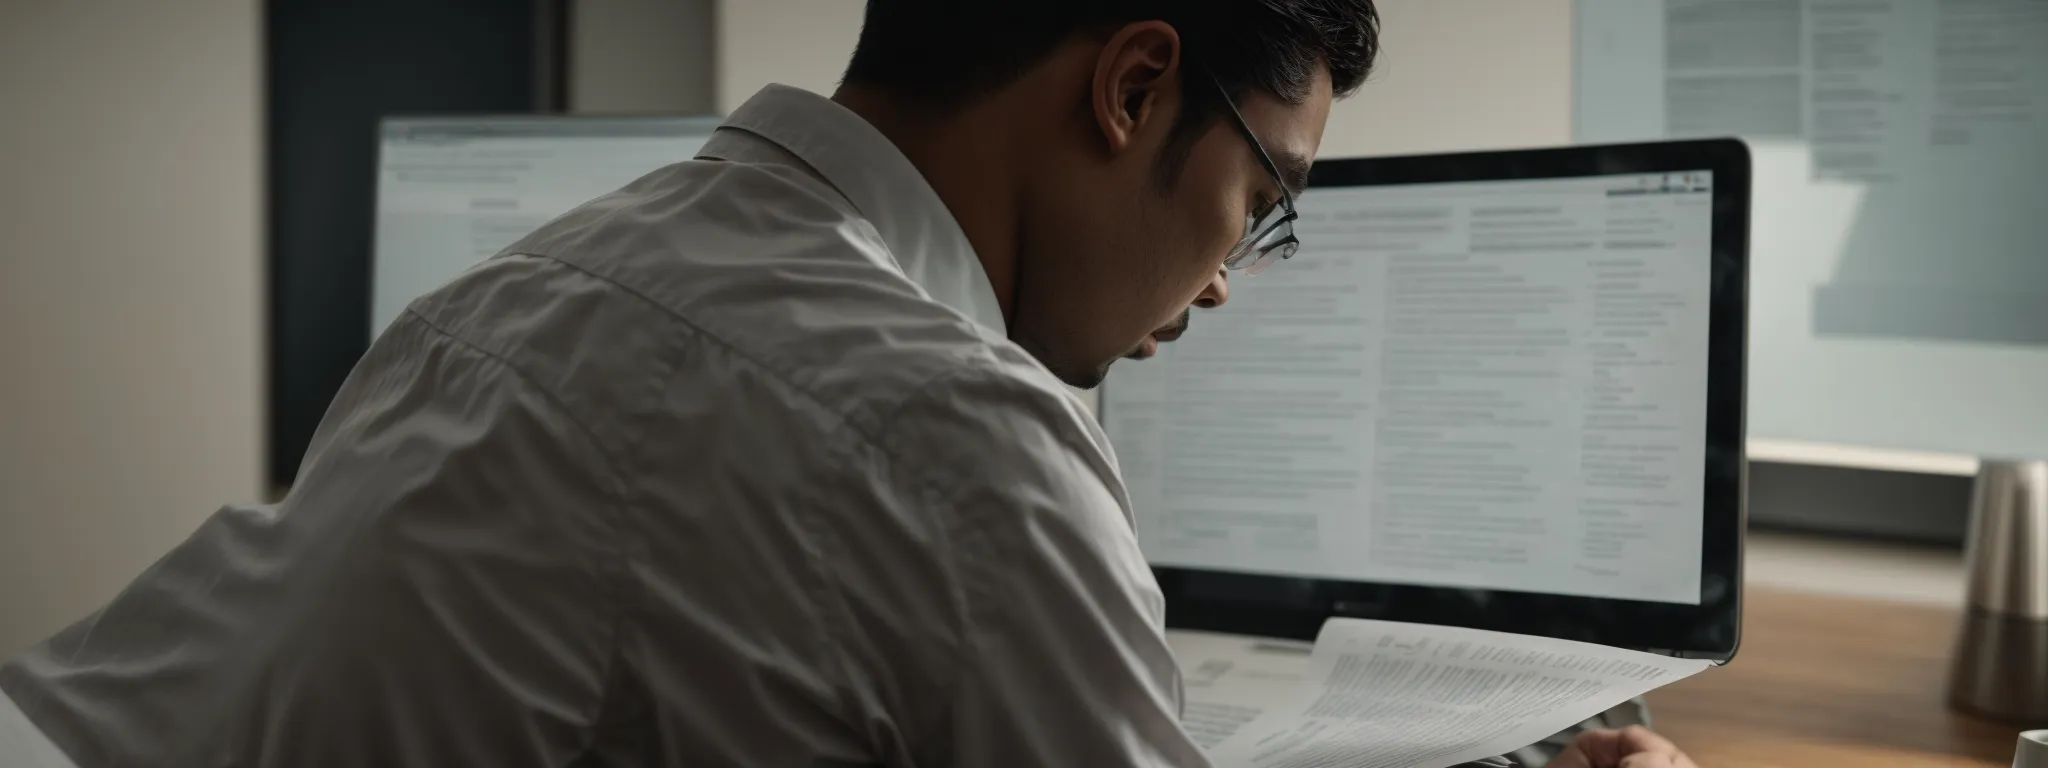 a focused individual intently reviewing documents on a computer screen, symbolizing strategic planning for financial aid applications.